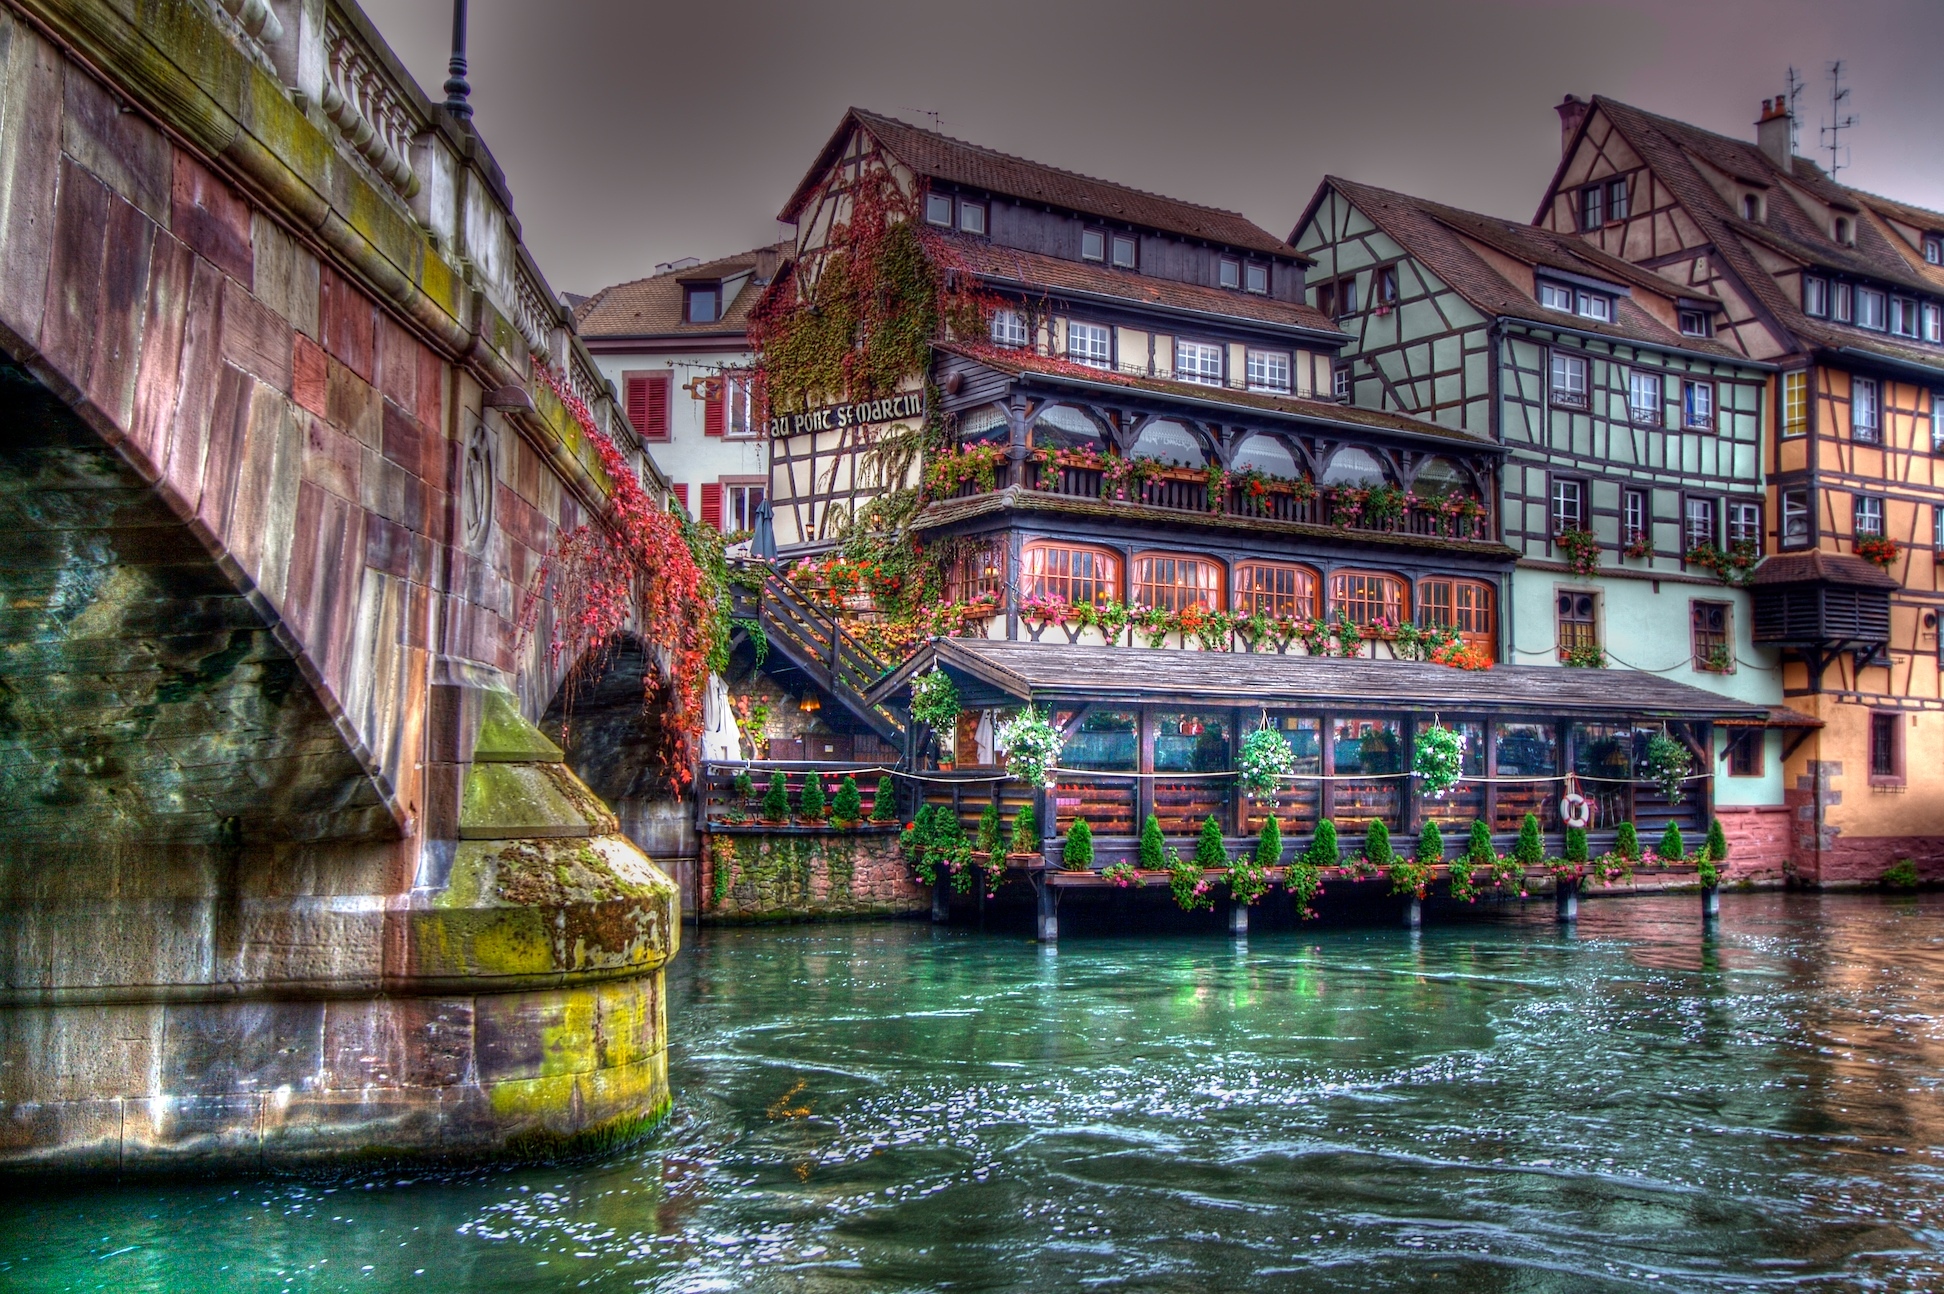 man made, strasbourg, bridge, canal, colorful, colors, france, hdr, house, cities